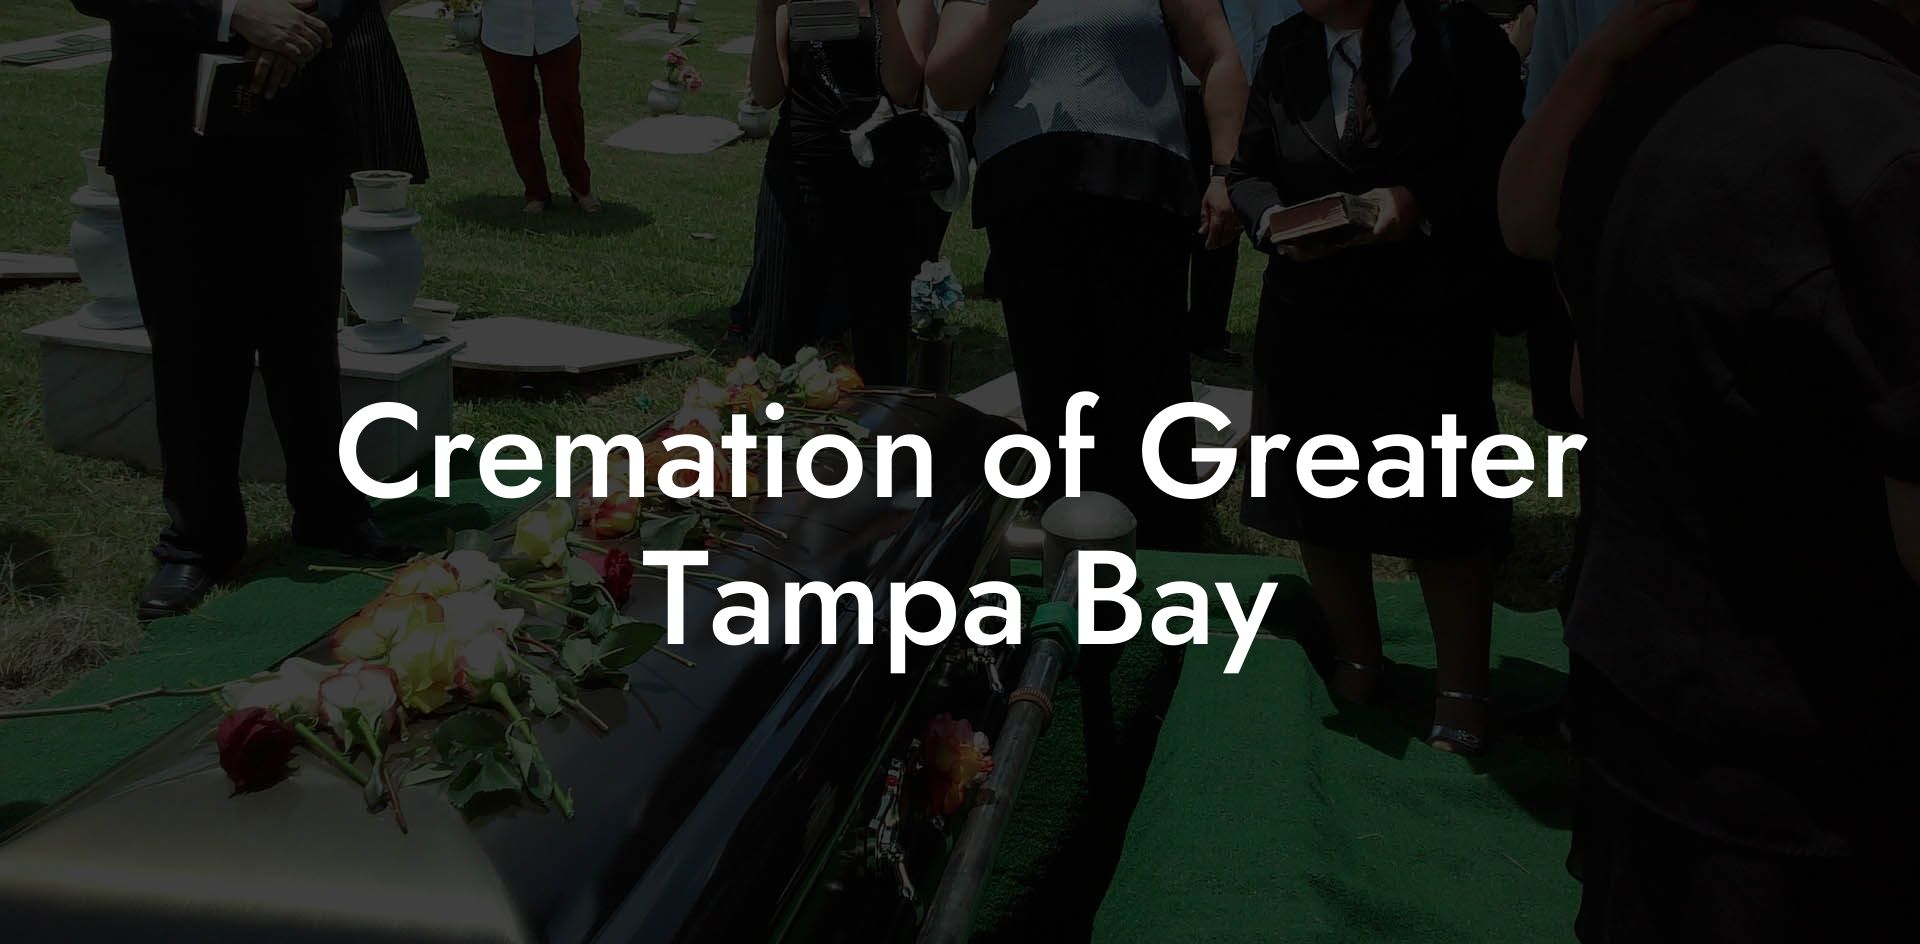 Cremation of Greater Tampa Bay